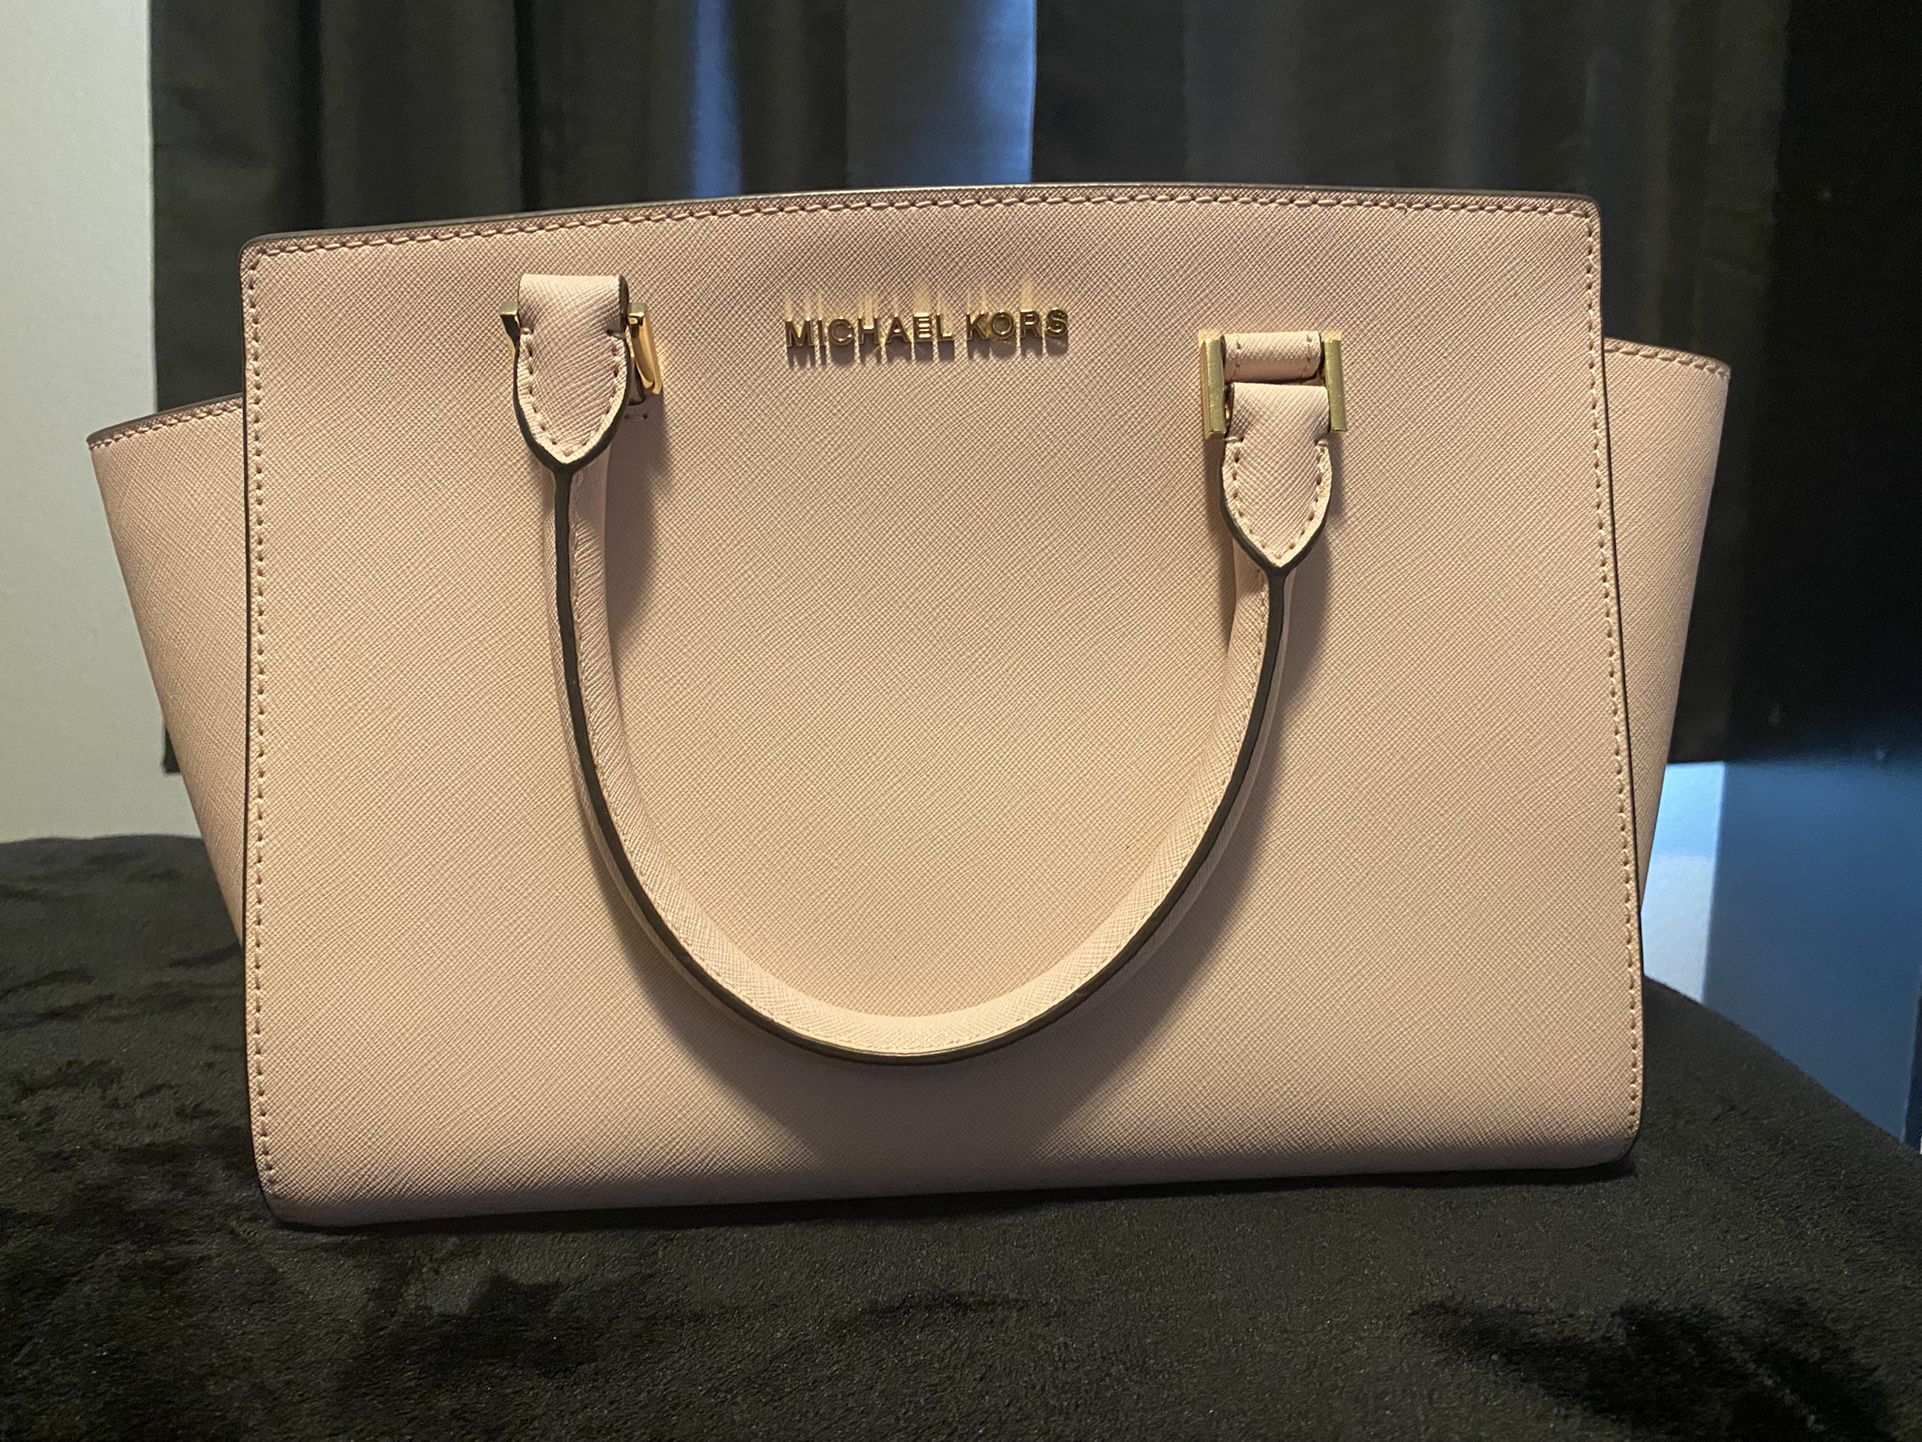 Michael kors Voyager Tote for Sale in Seattle, WA - OfferUp